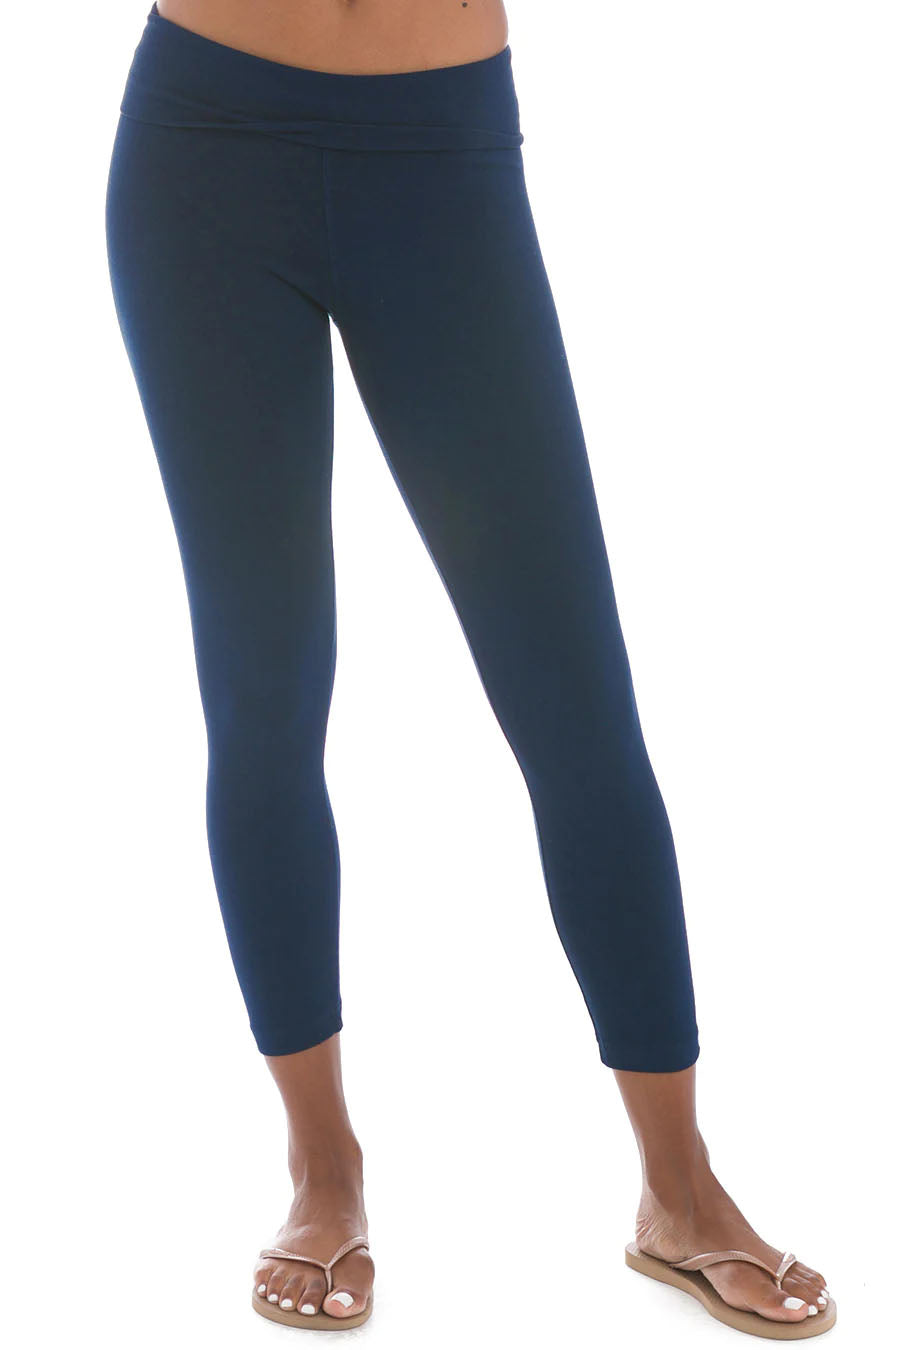 Rolldown Layered Legging (Style 588, Past Midnight) by Hard Tail